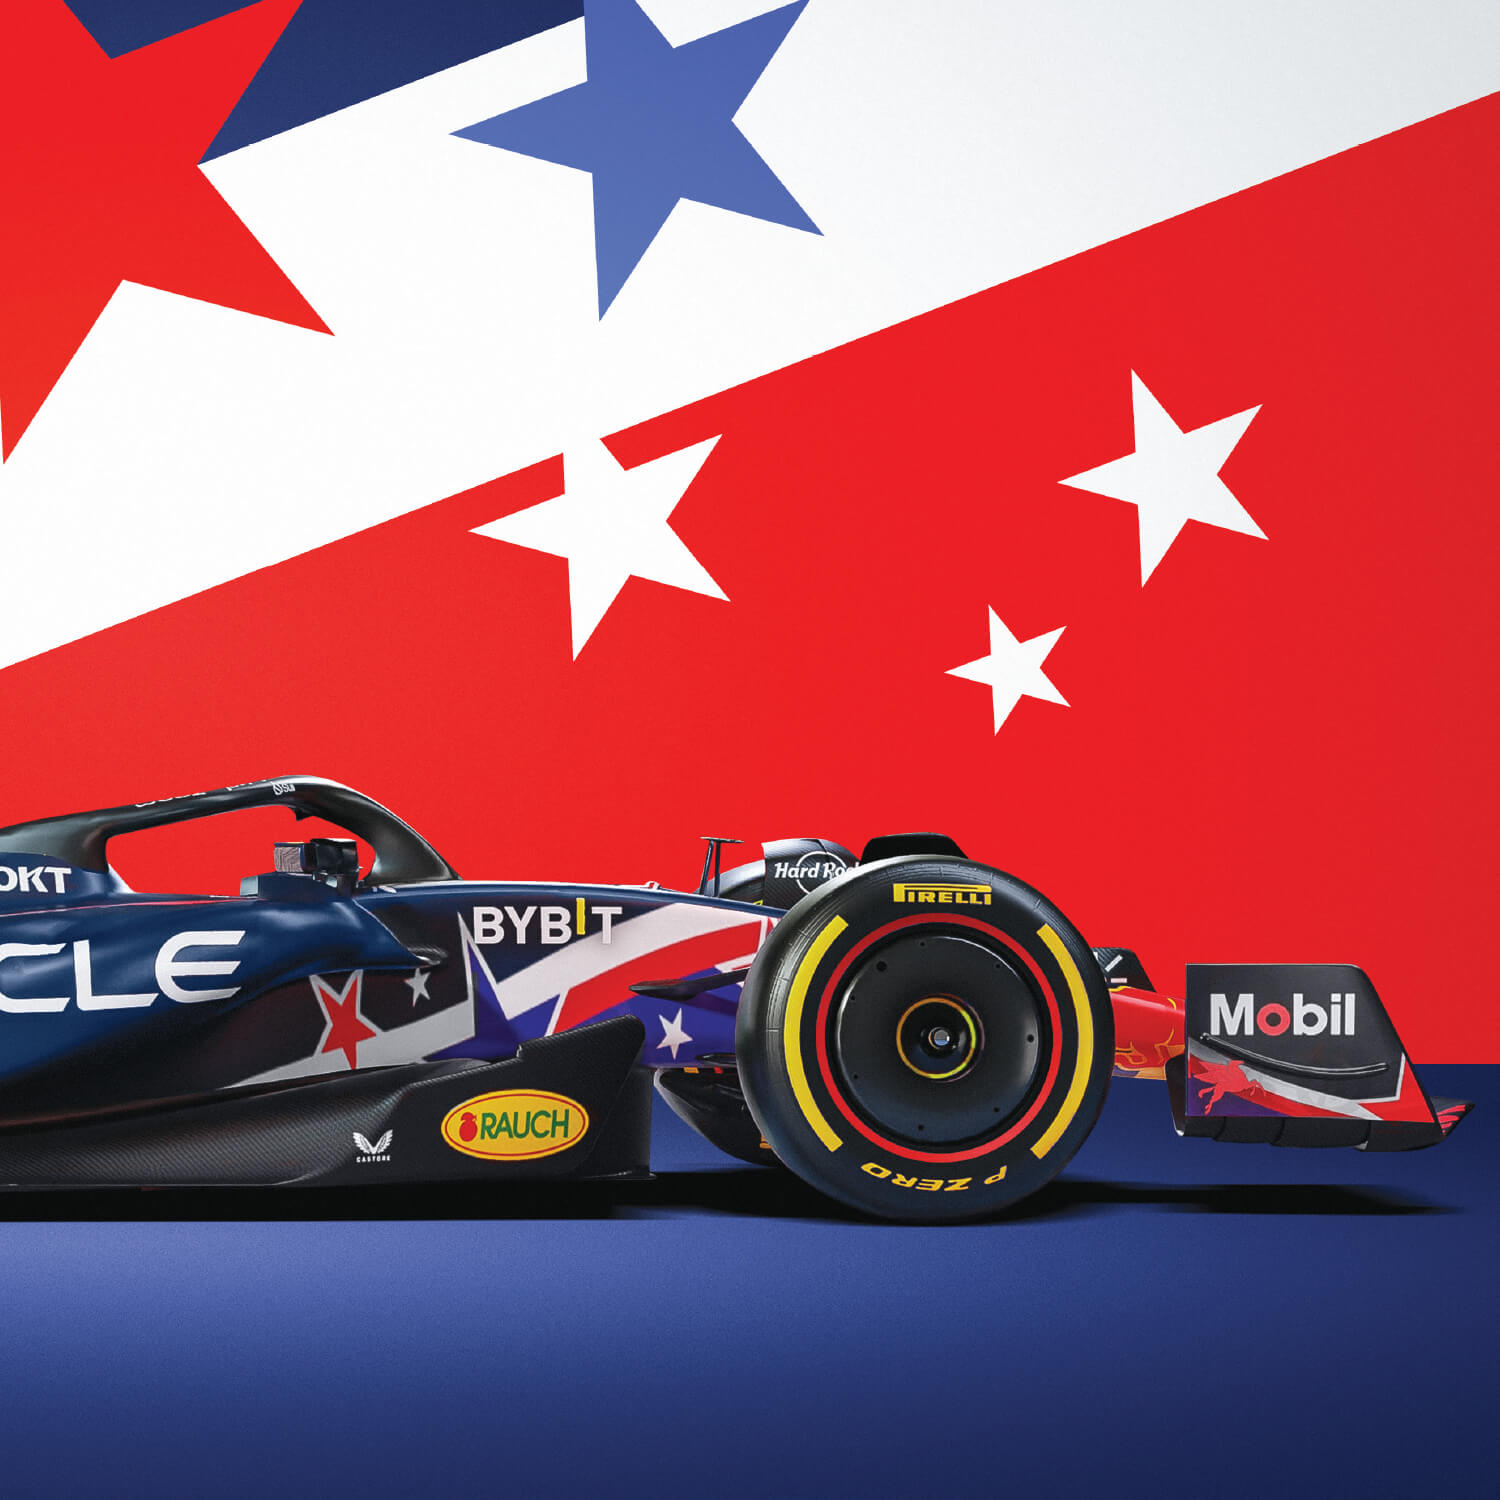 Poster | Oracle Red Bull Racing - Melbourne - 2023